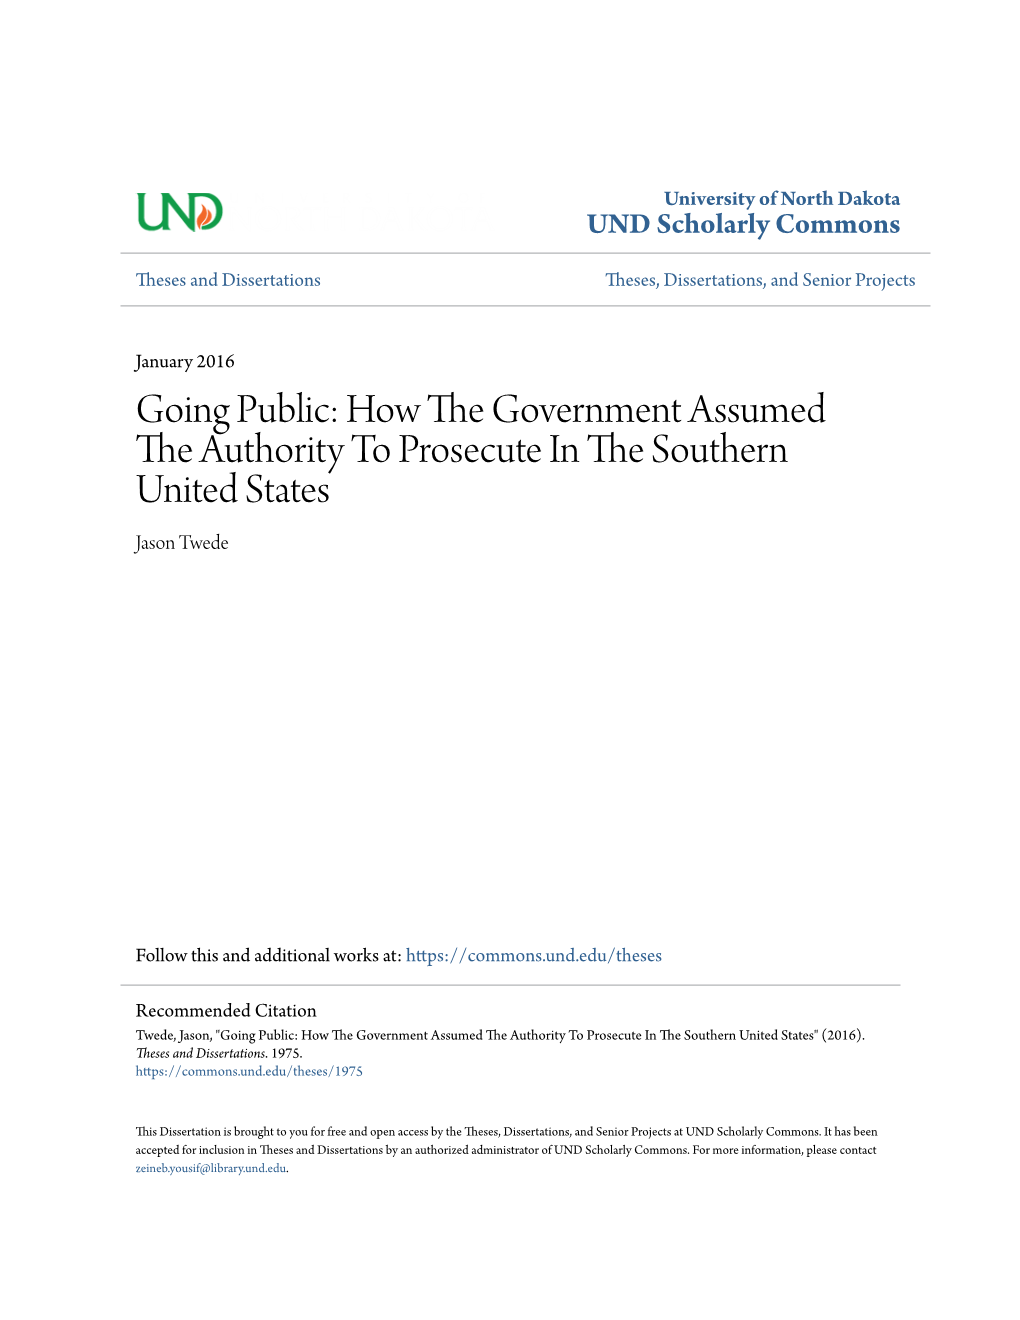 Going Public: How the Government Assumed the Authority to Prosecute in the Southern United States